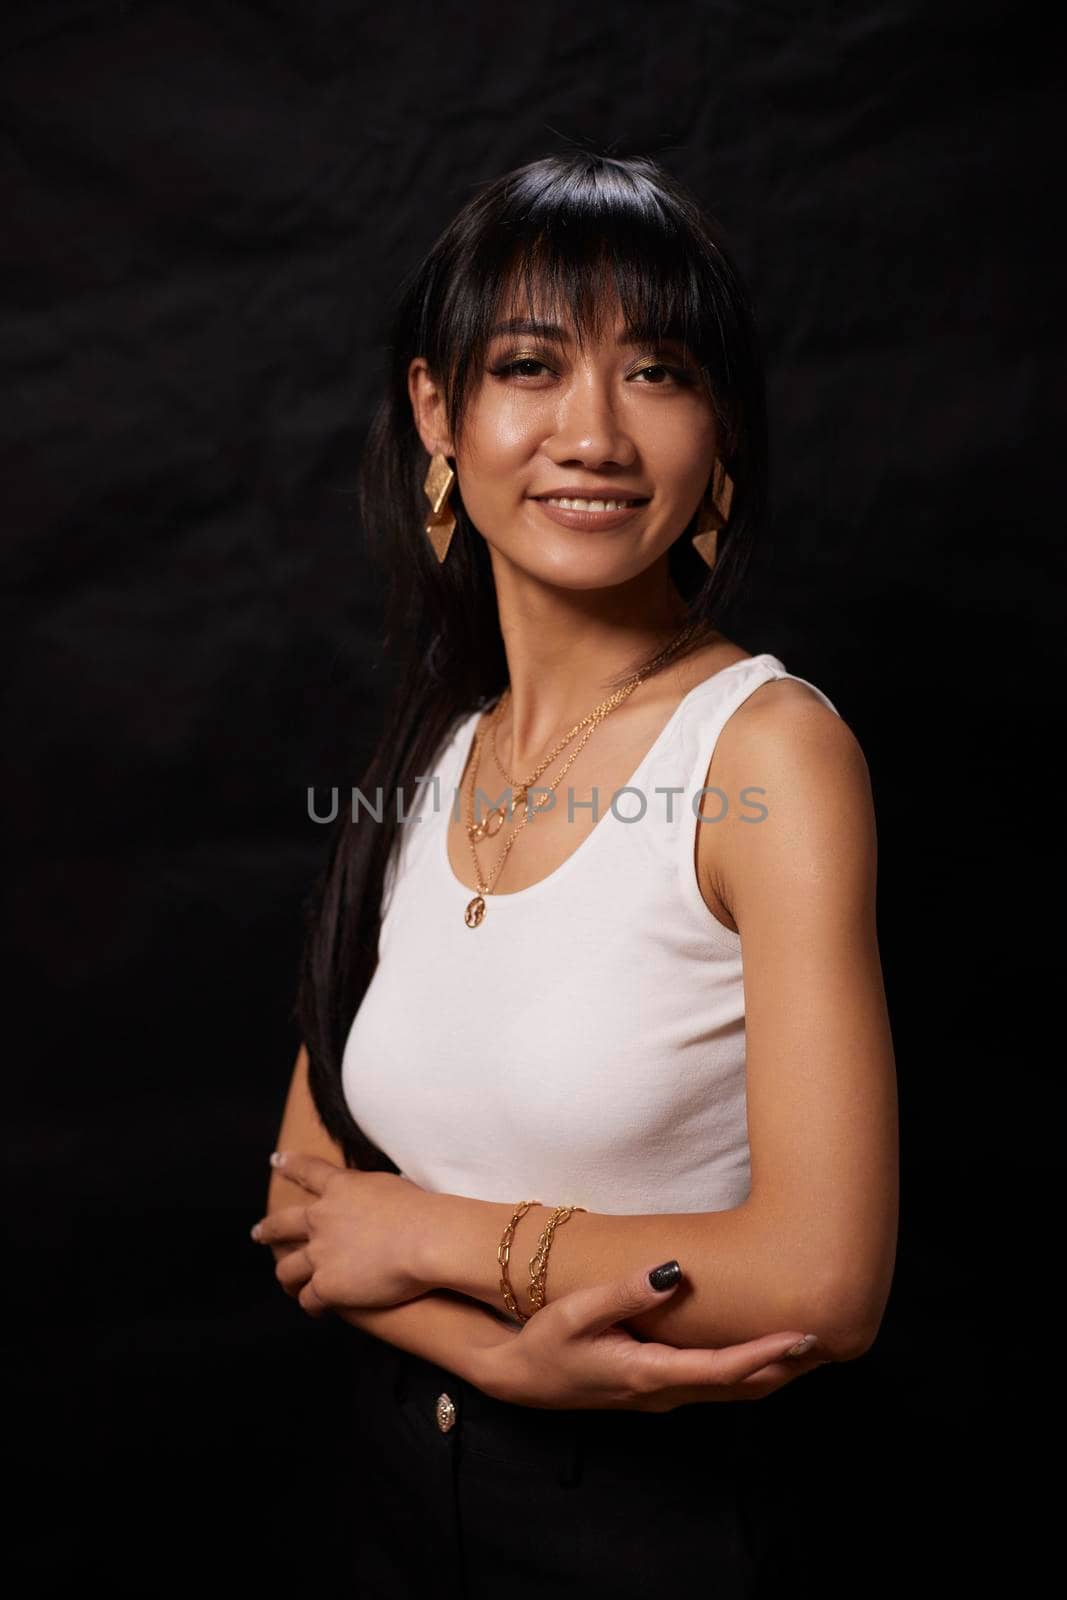 portrait shot of young happy asian or vietnamese woman, enjoying lifestyle, joy, happiness, photo on black background. by mosfet_ua